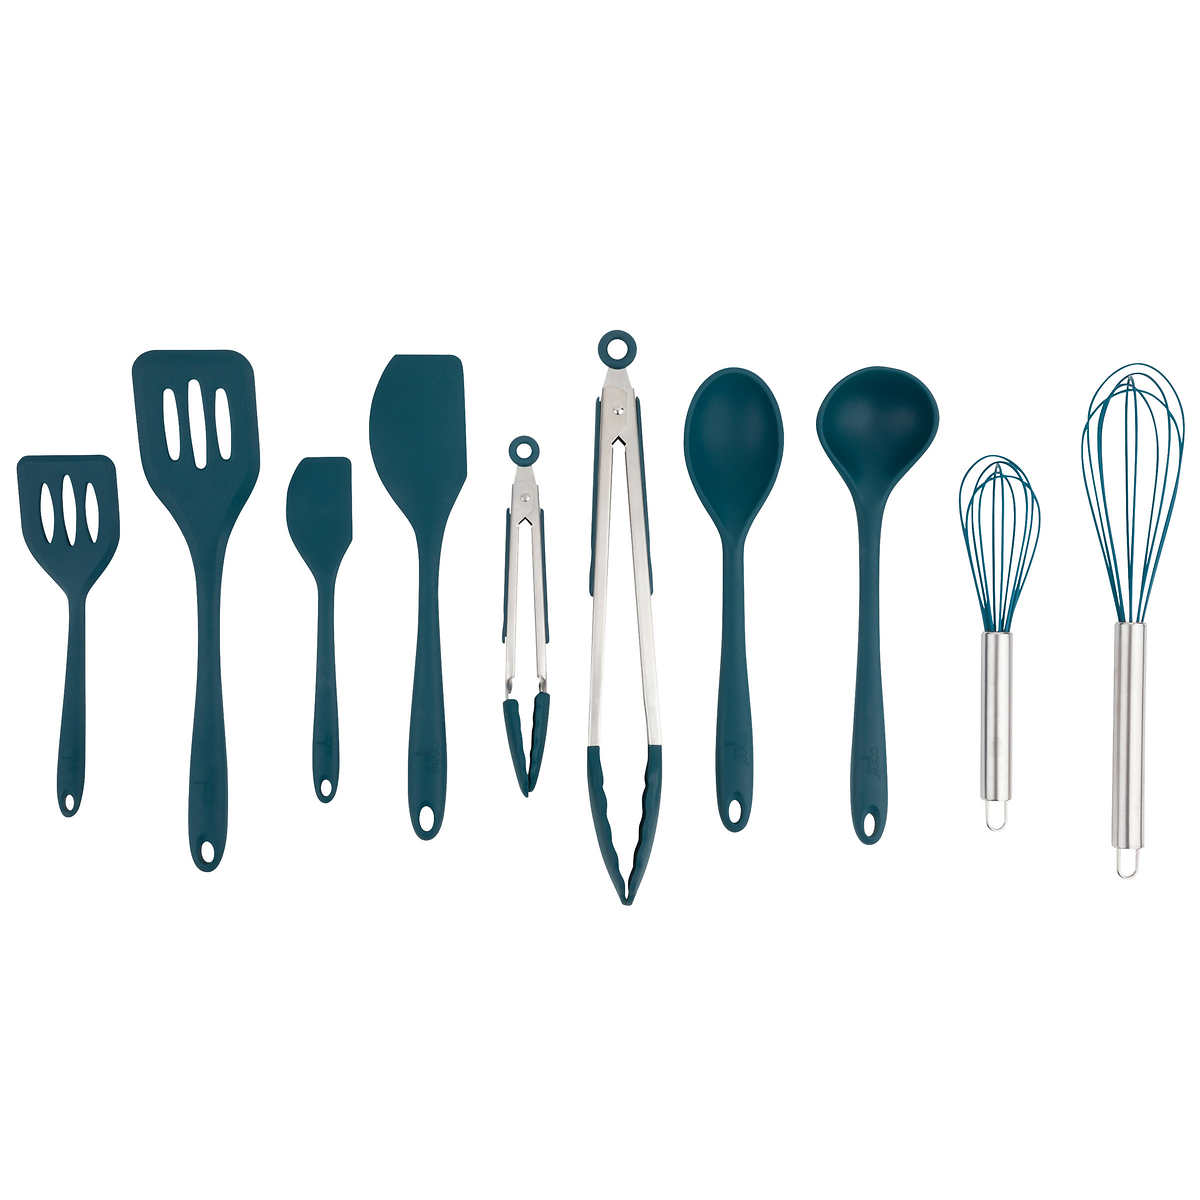 Costco Is Selling an 8-Piece Silicone Utensil Set for Less Than $15 - Parade